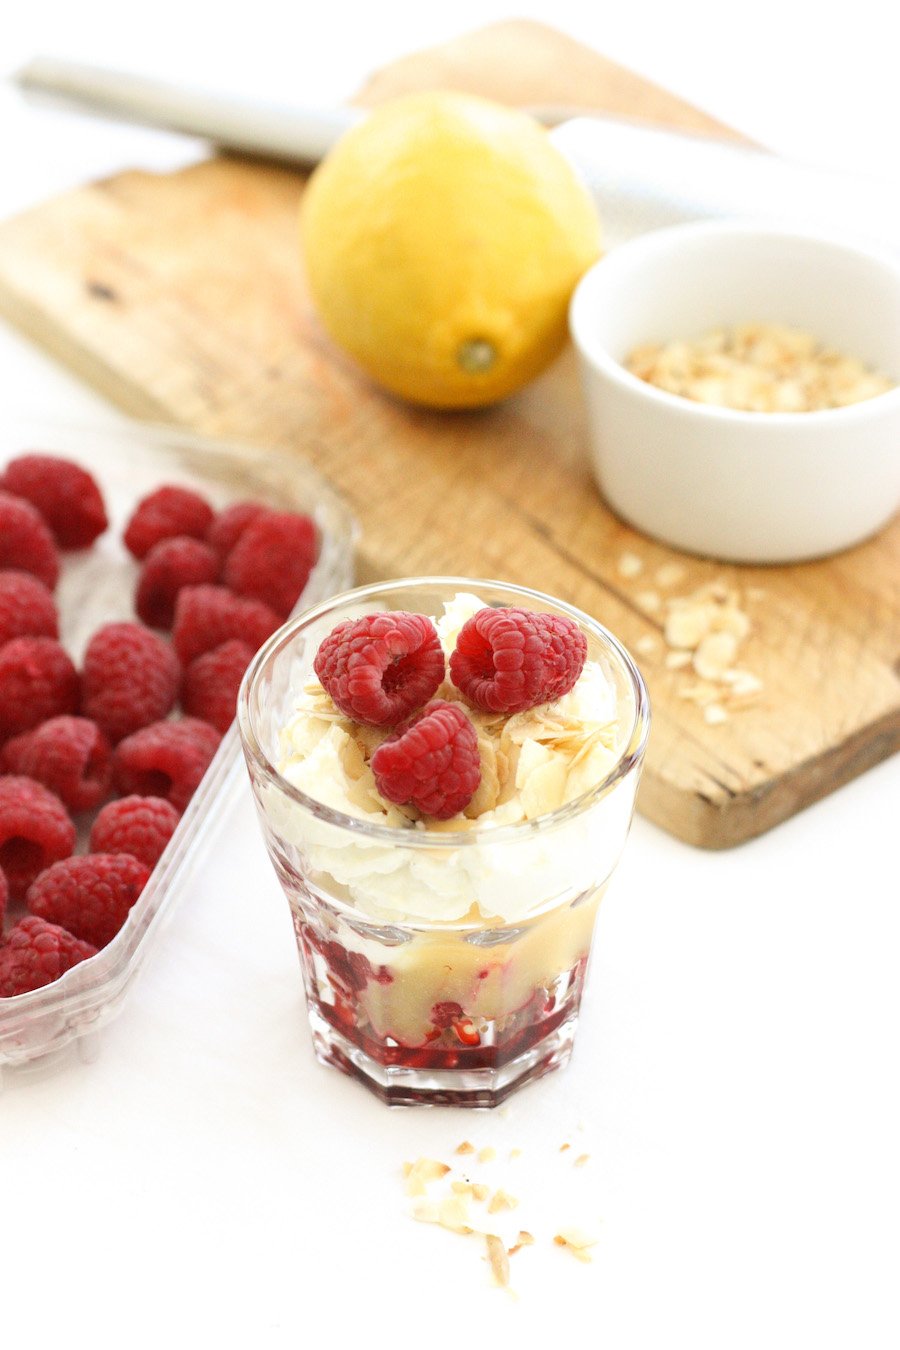 An Easy Lemon and Raspberry Cheesecake in front of a chopping board and a carton of raspberries